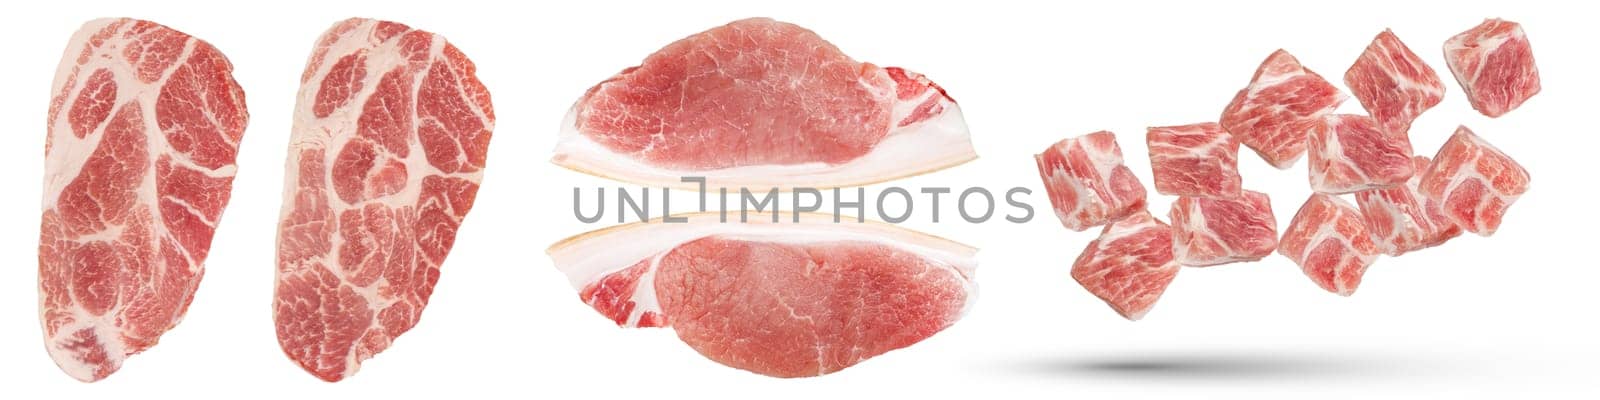 Lots of different pieces of raw pork. Set of fresh pork pieces isolated on white background. Pieces of pork for inserting into a design, project, for an advertising banner or for a label on a package